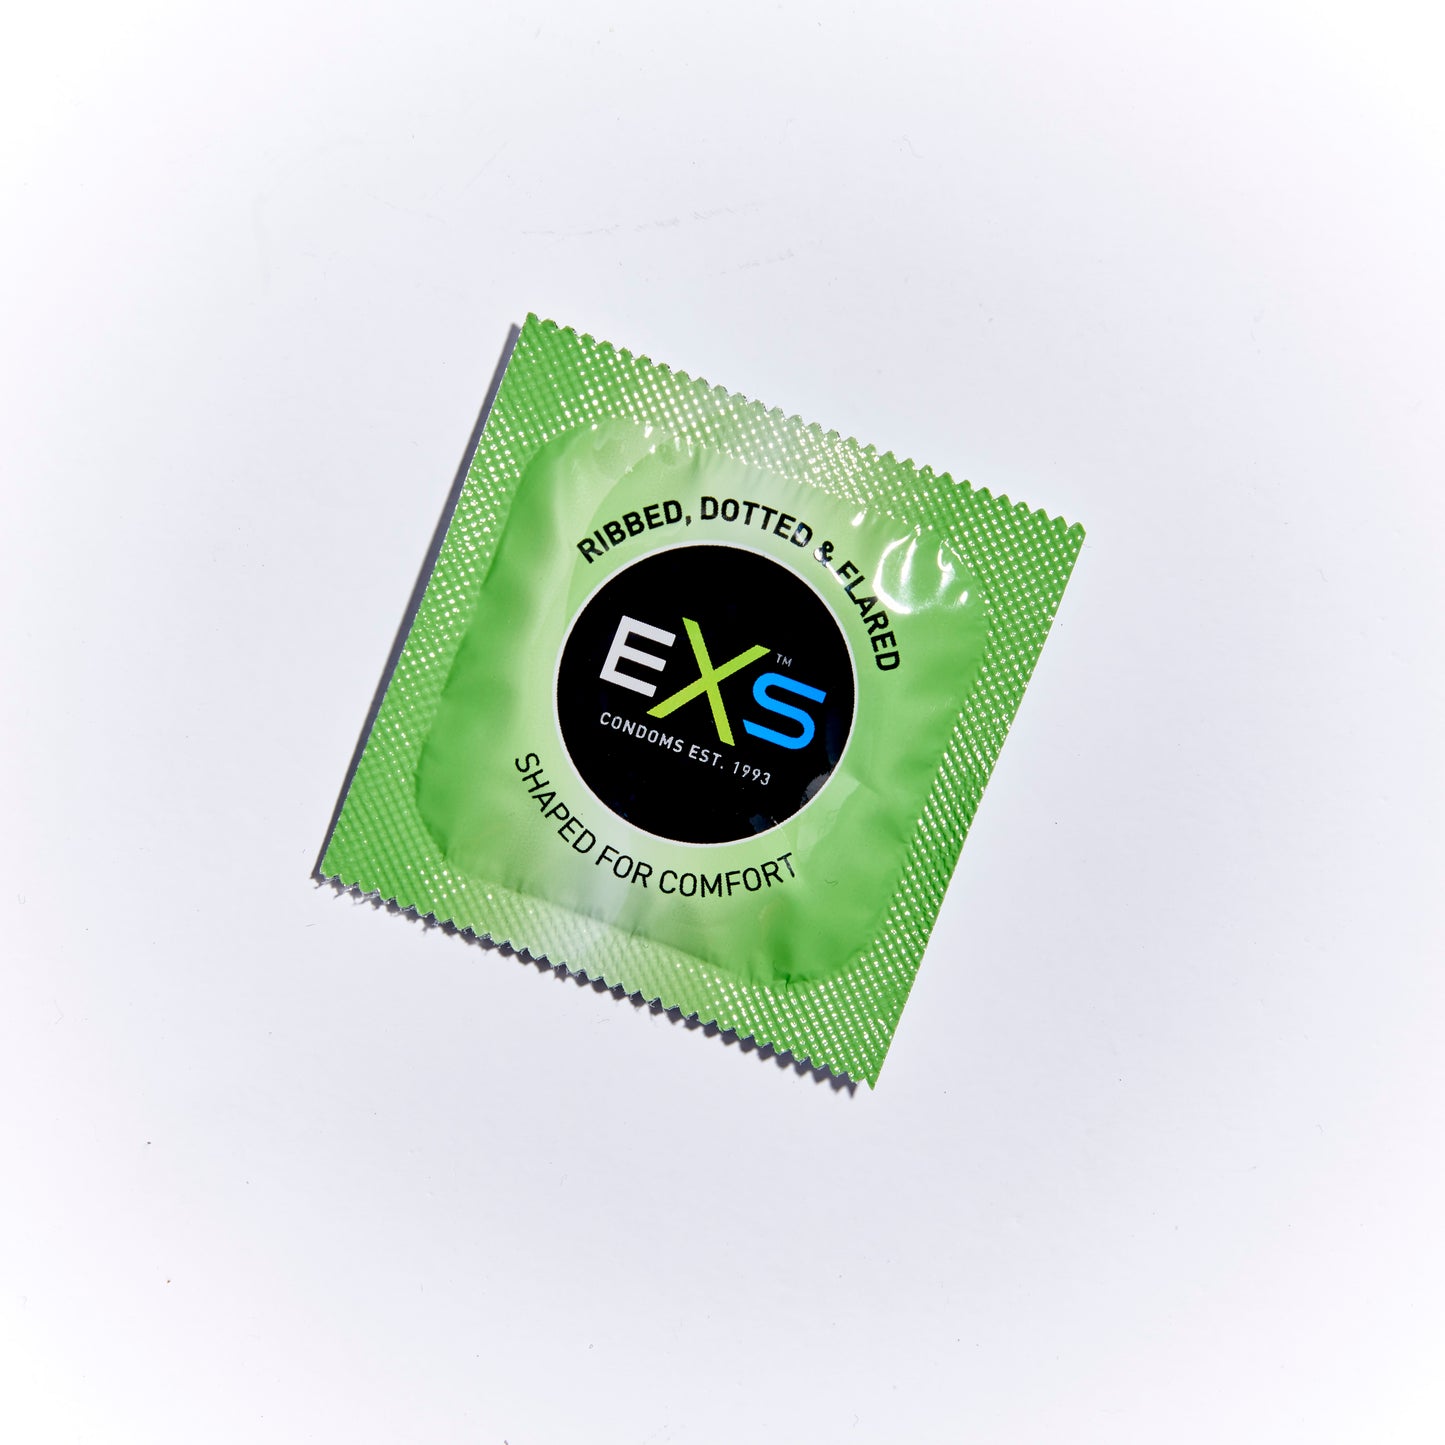 exs condoms ribbed and dotted single condom